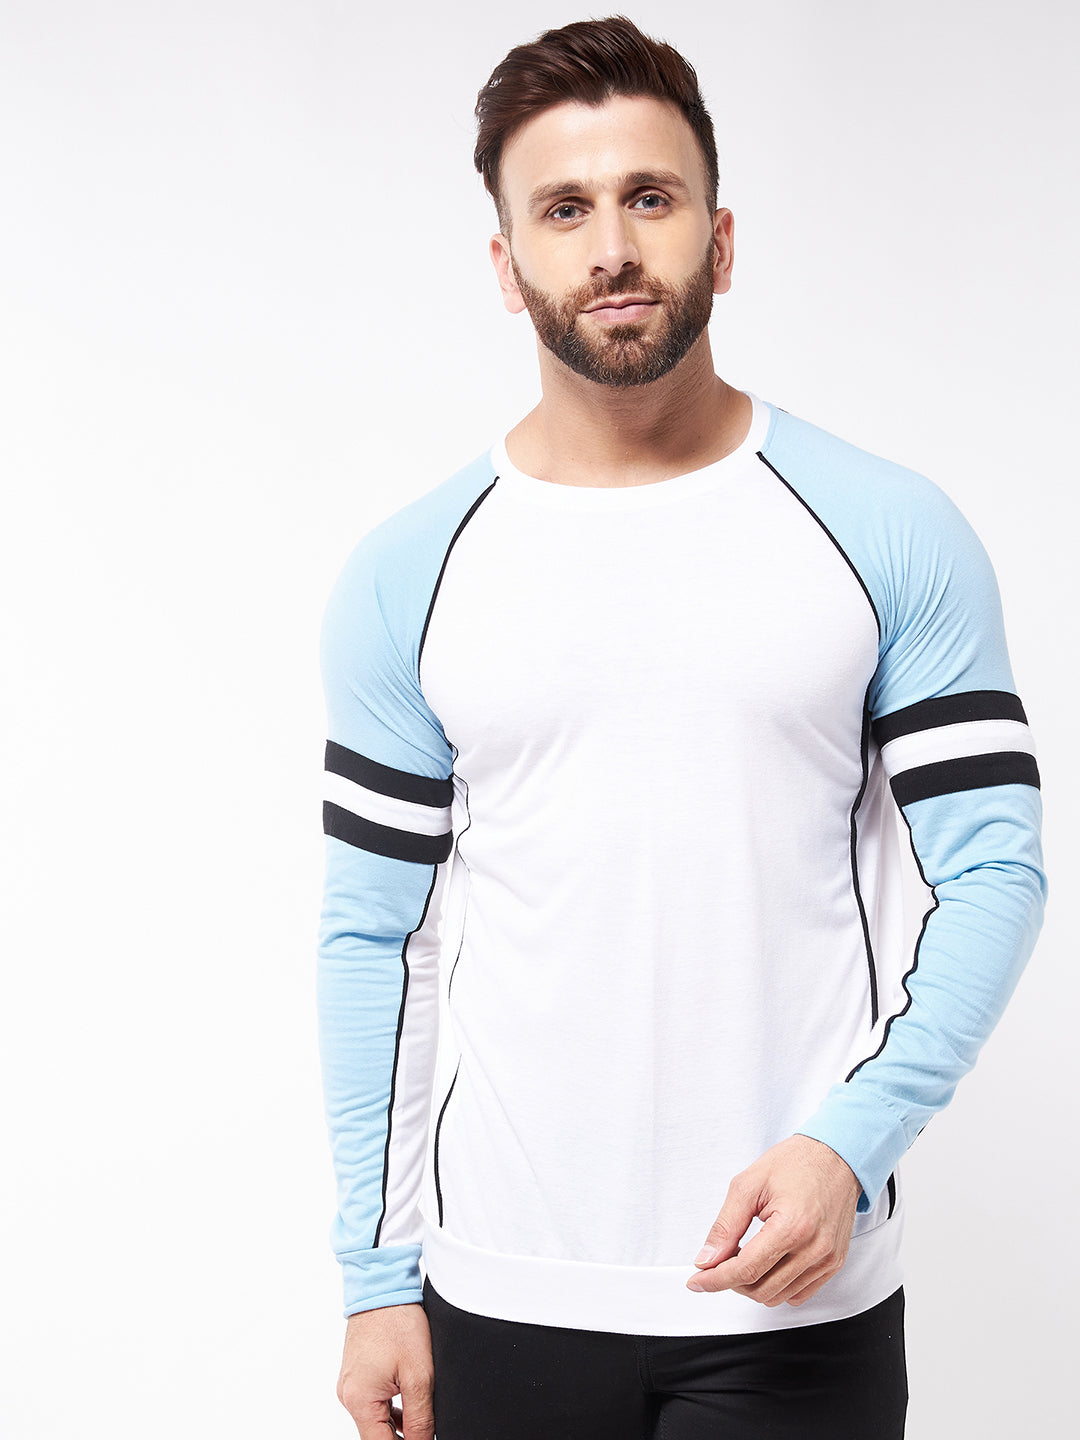 Sky Blue and White Color Full Sleeve  T-Shirt